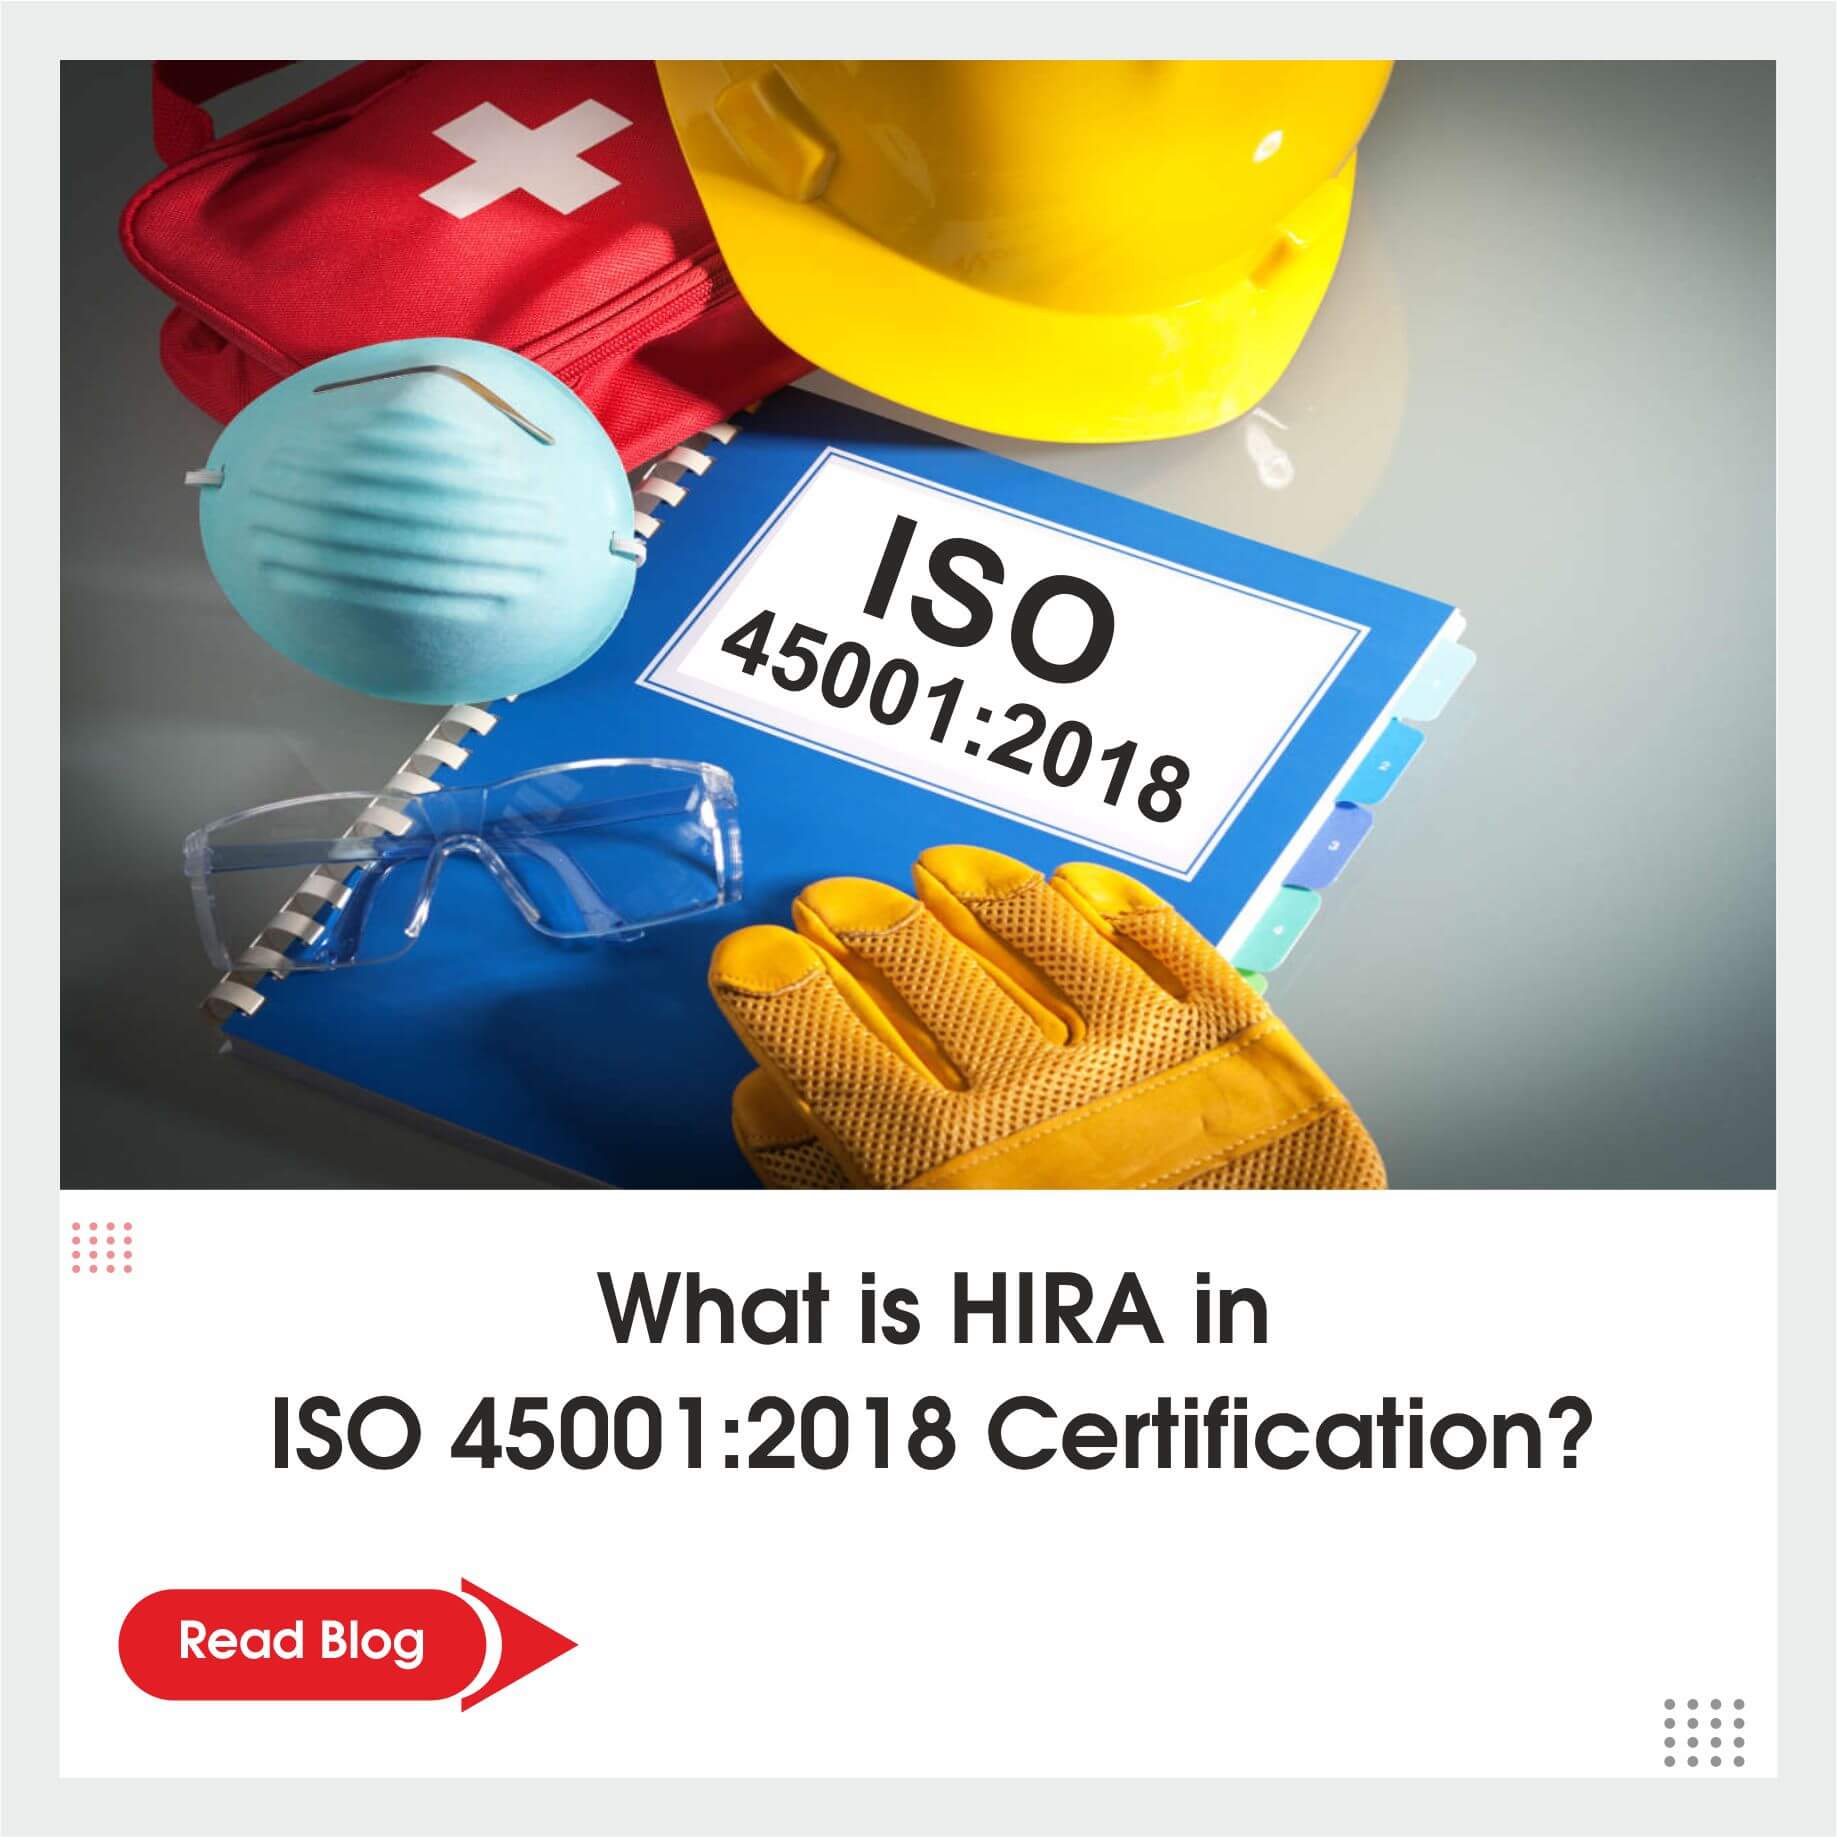 What is HIRA in ISO 45001:2018 Certification?